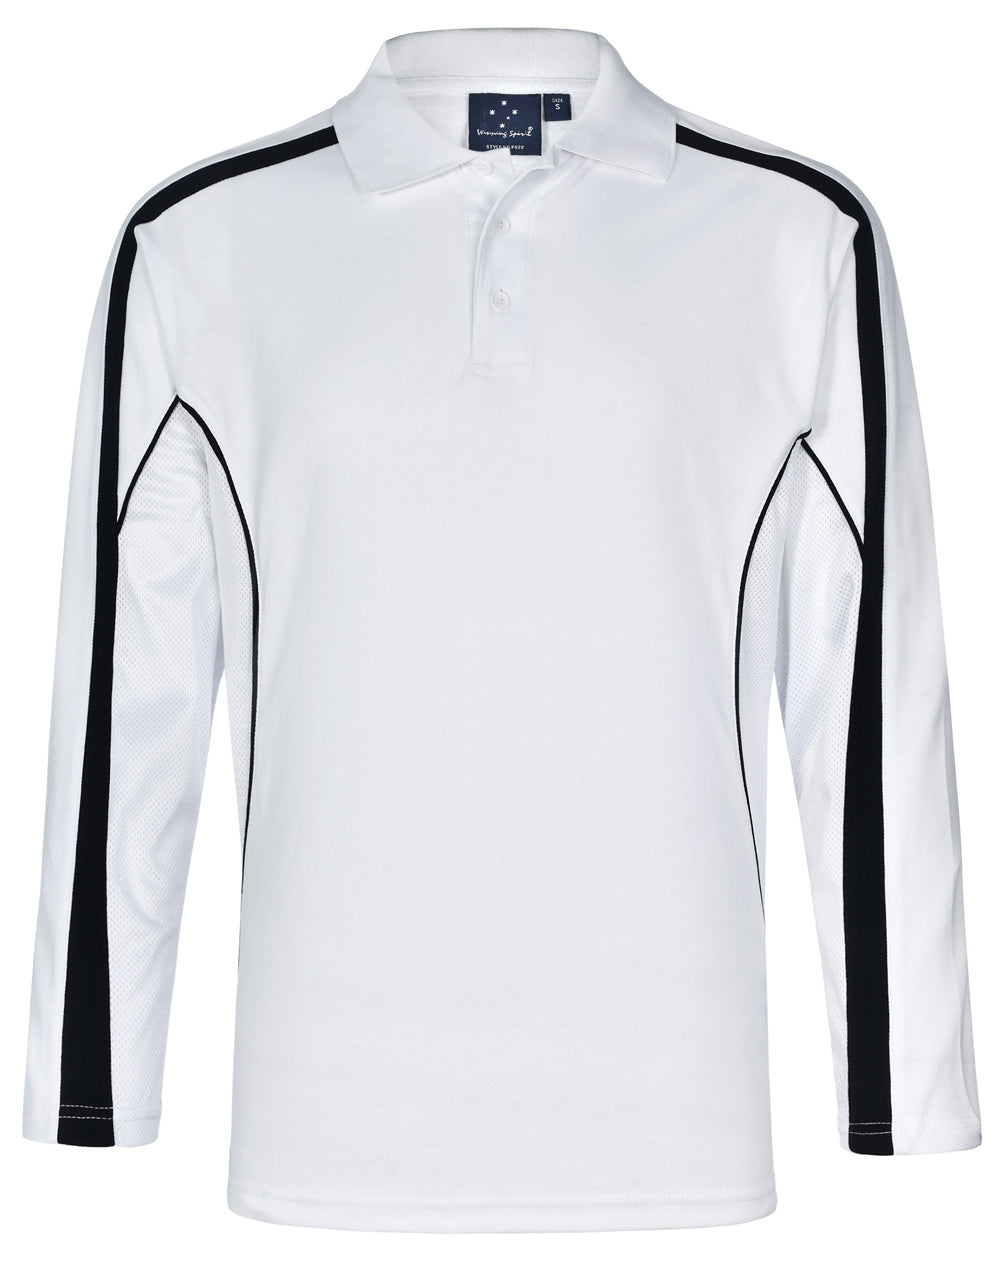 Legend Truedry Long Sleeve Polo - made by AIW